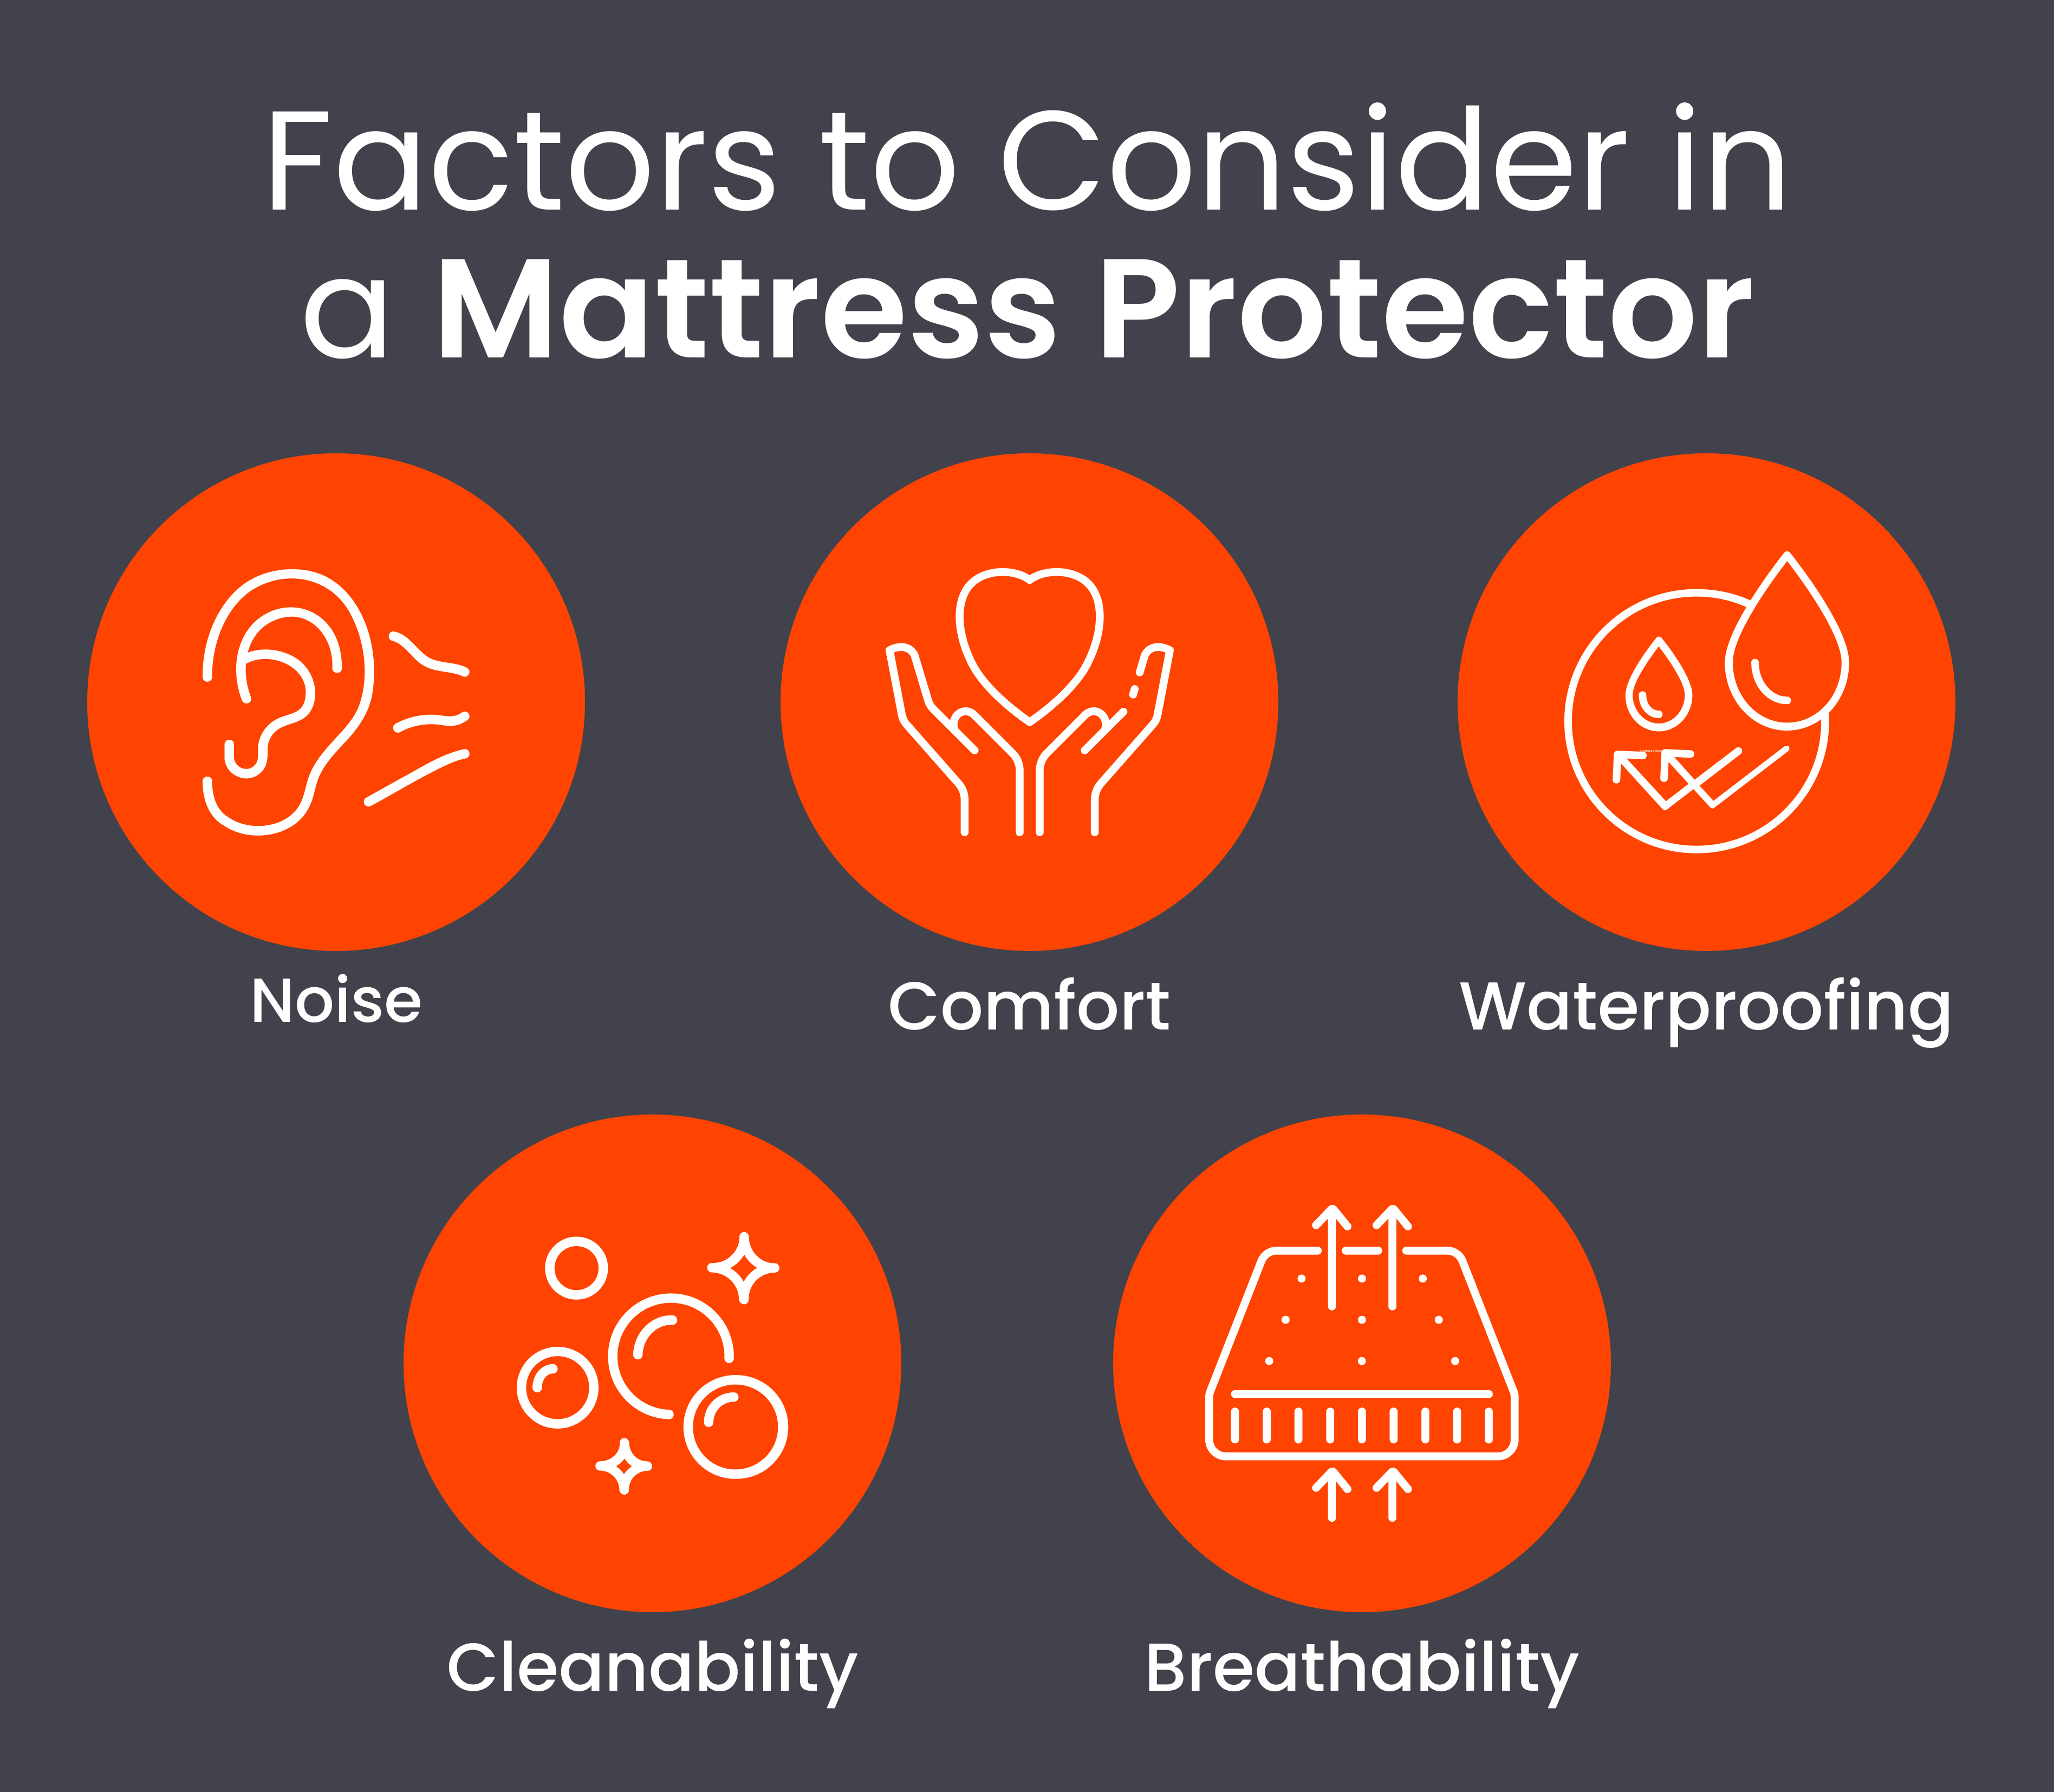 Factors to consider in a mattress protector